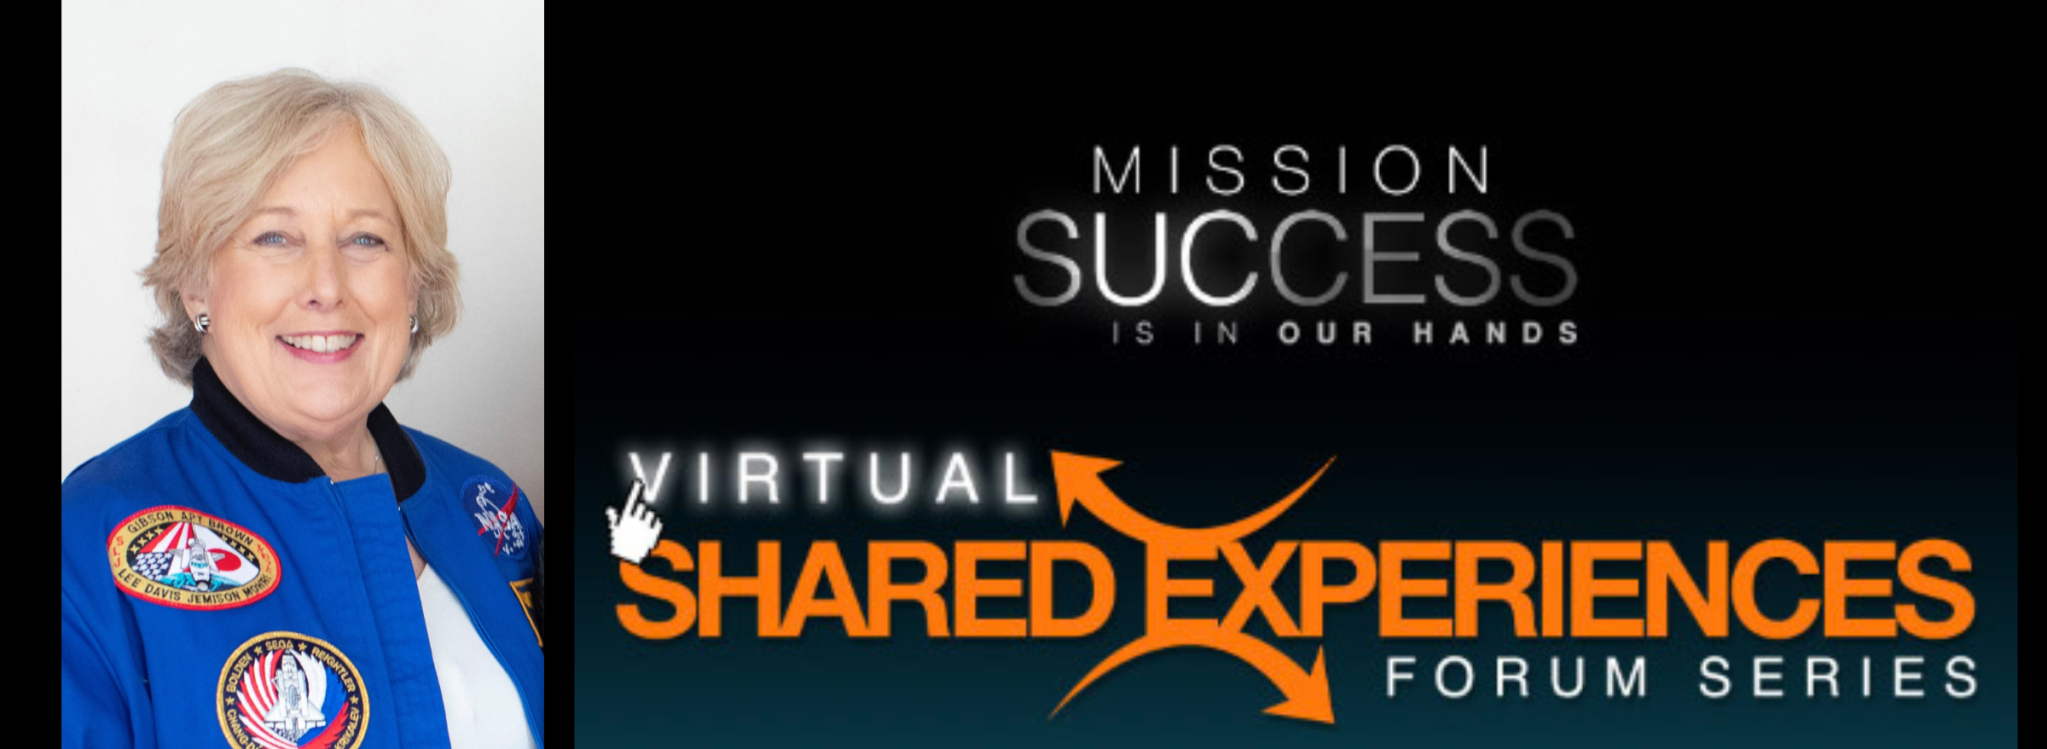 Former astronaut Dr. Jan Davis will be the next speaker in the Mission Success is in Our Hands virtual Shared Experience Forum series Oct. 20 at 11:30 a.m. 